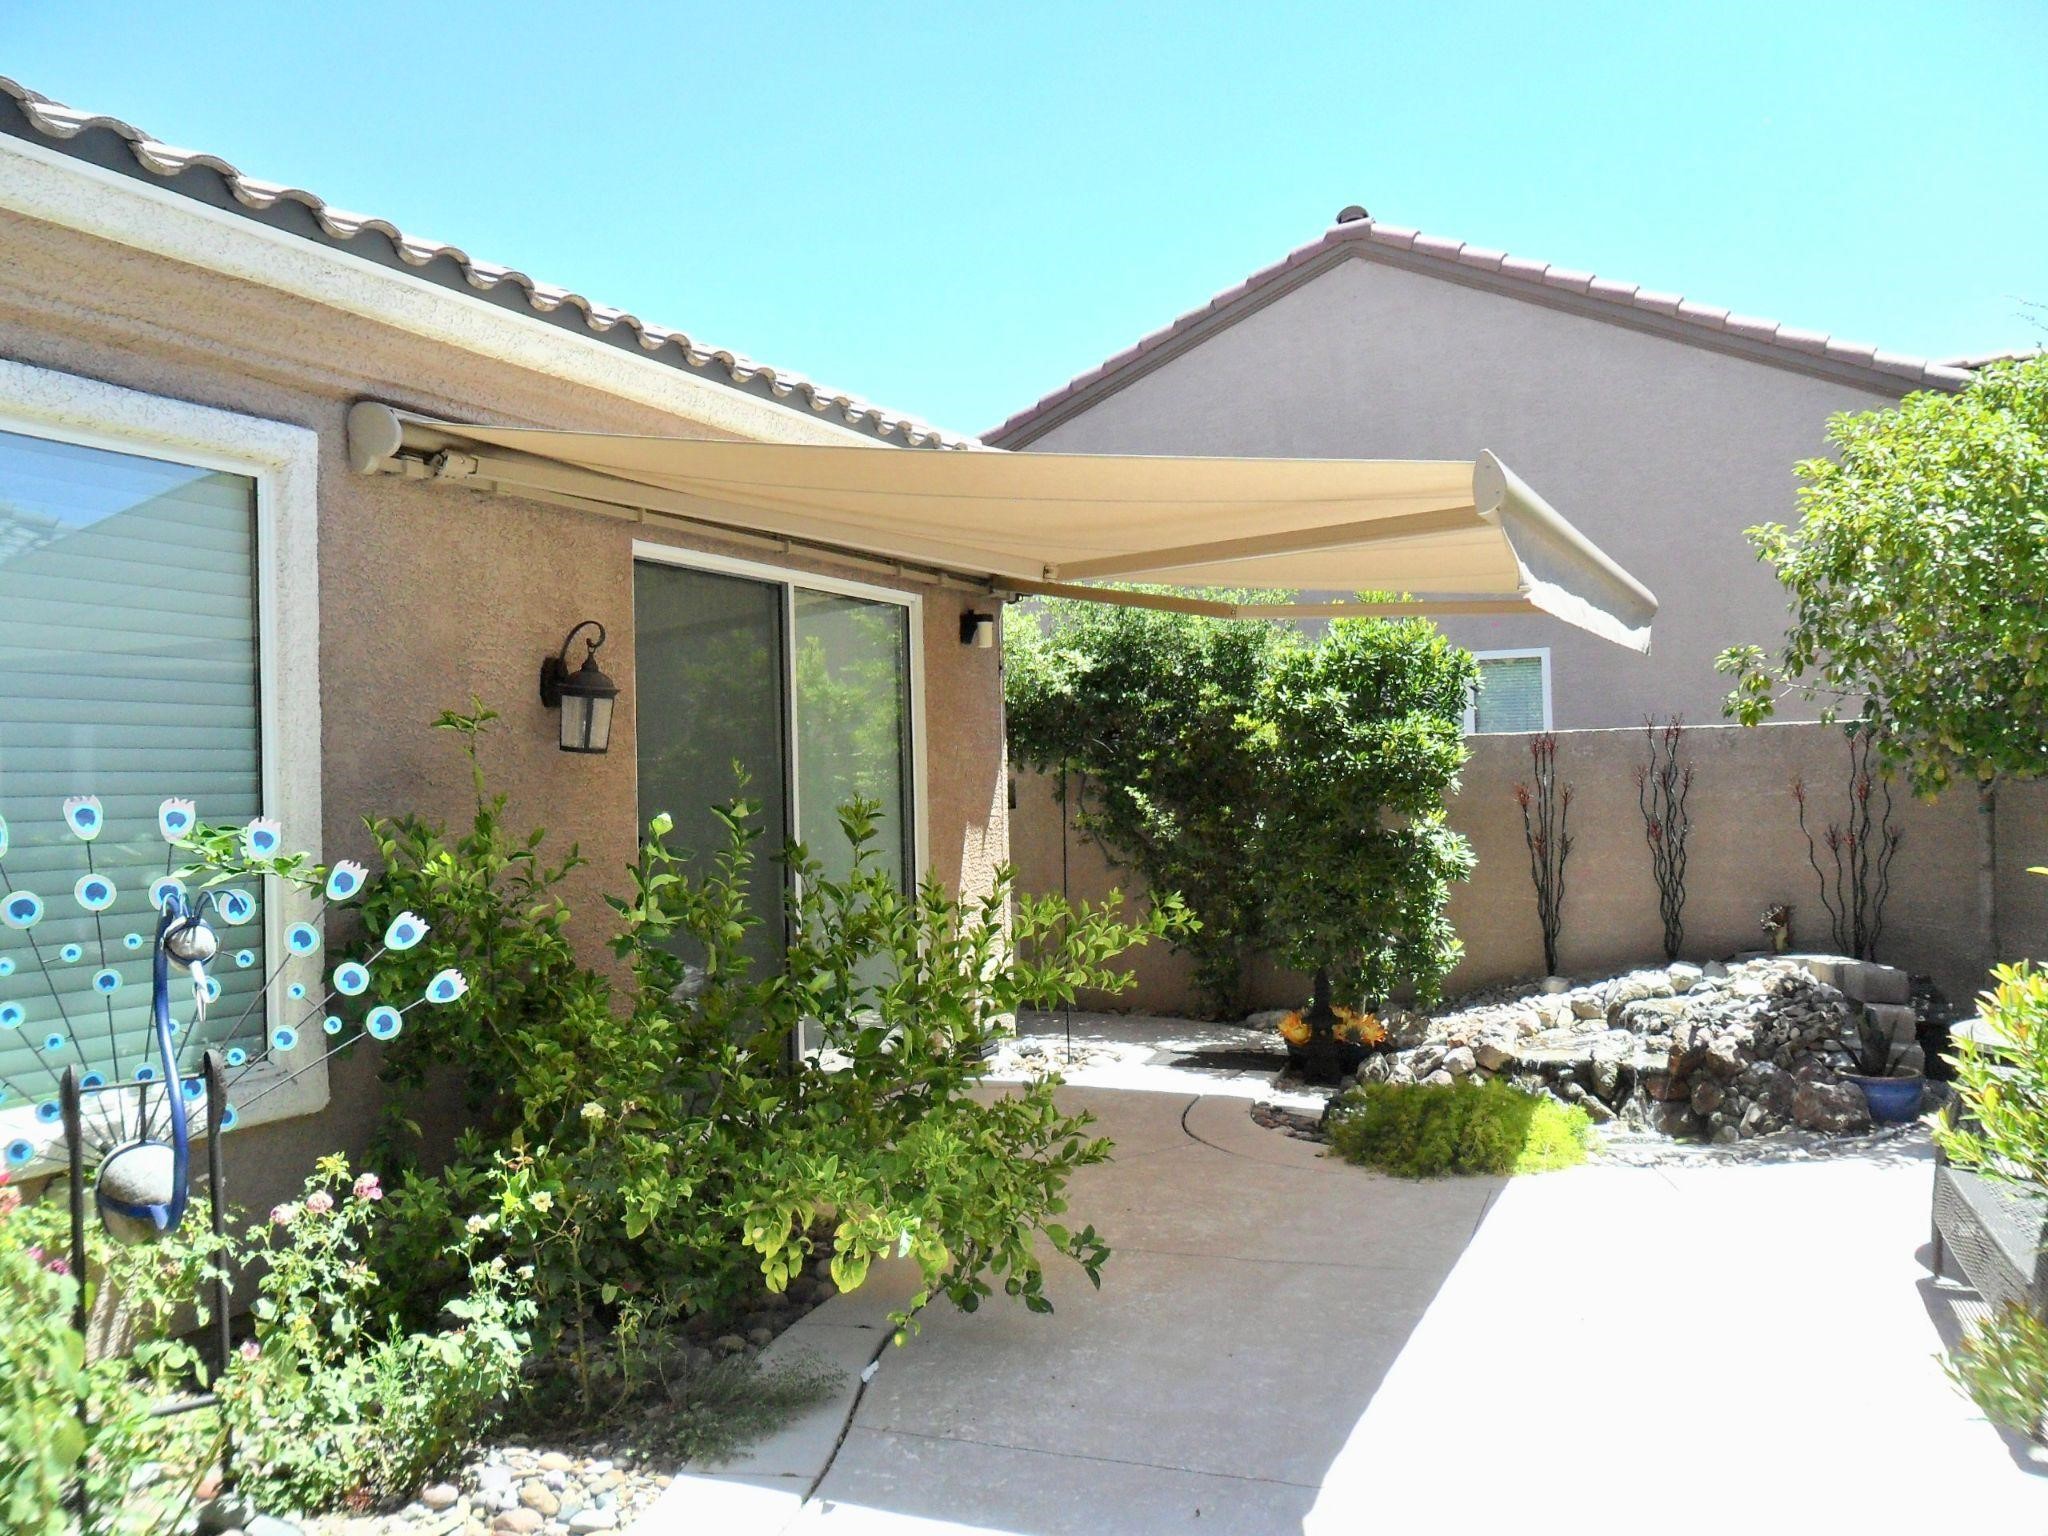 Patio awnings on home in Las Vegas, Nevada